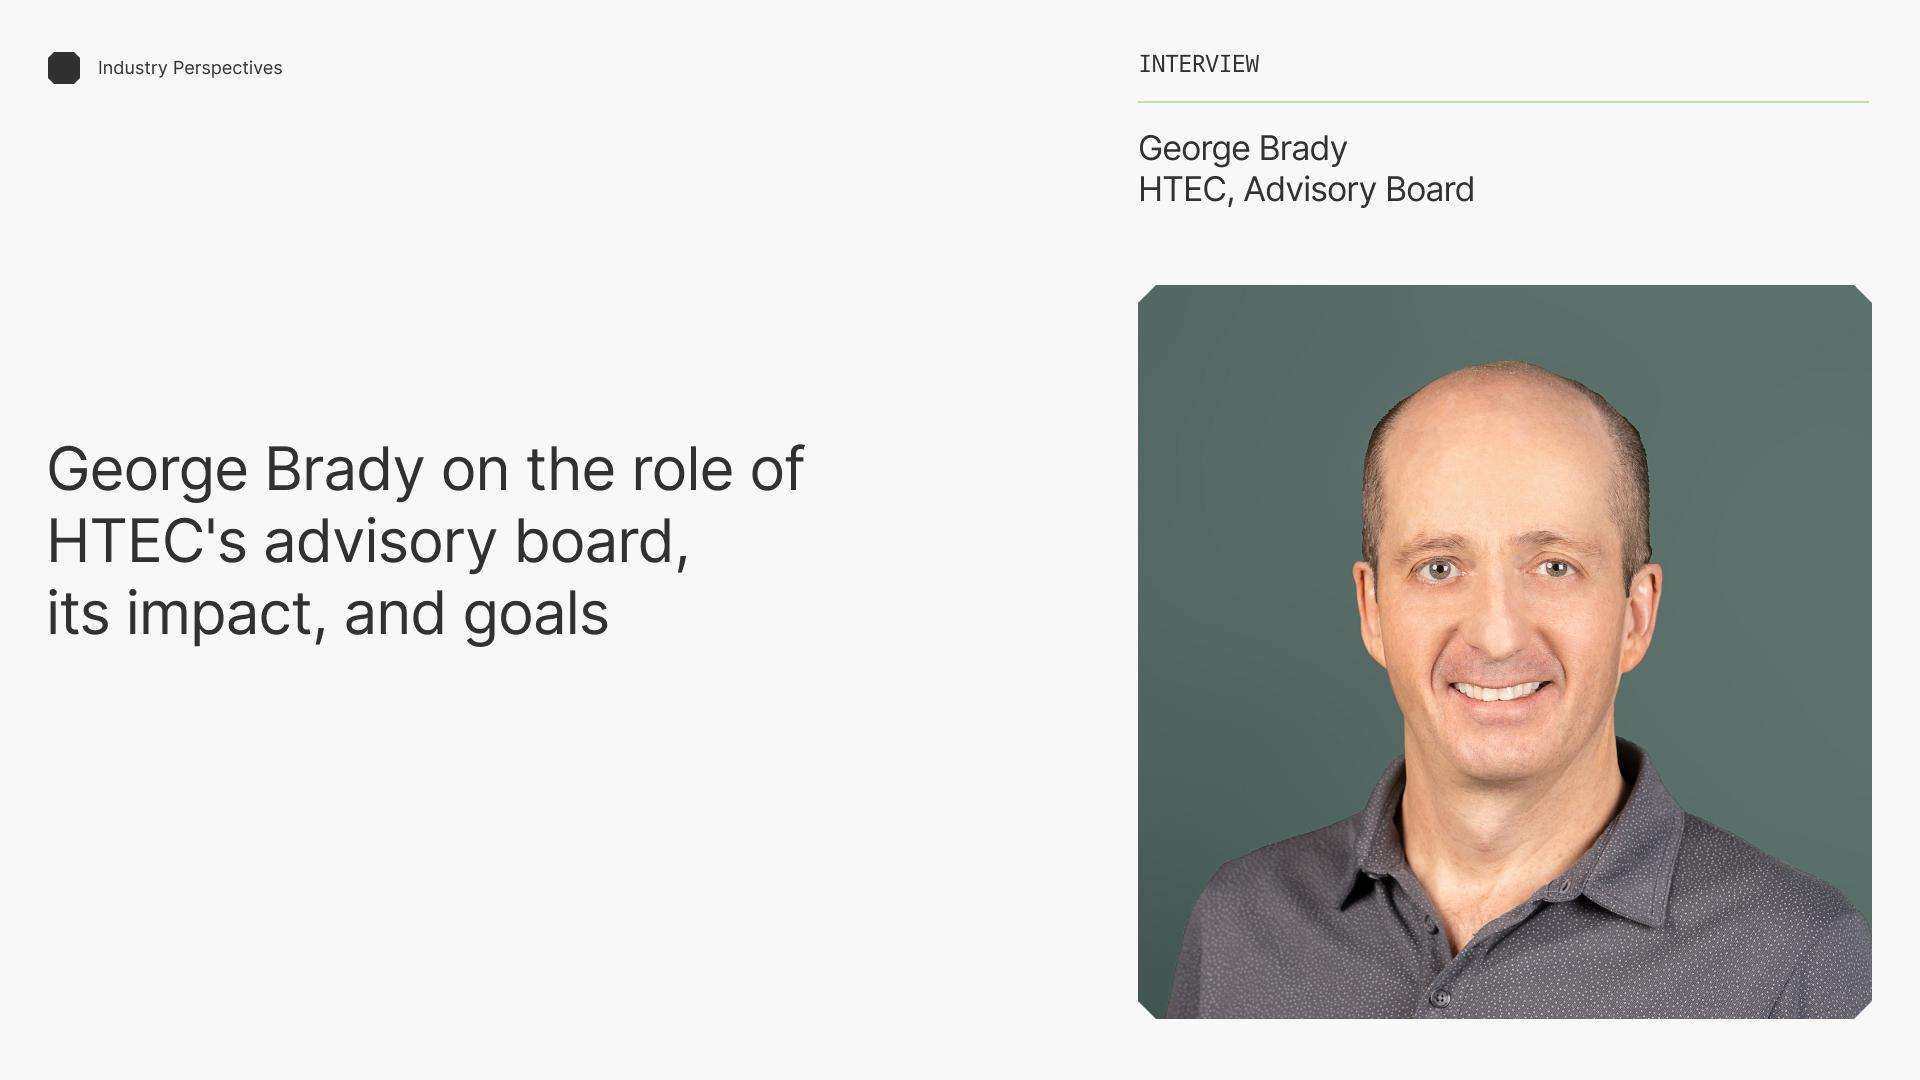 loanDepot CIO George Brady joins HTEC’s Advisory Board to accelerate global expansion